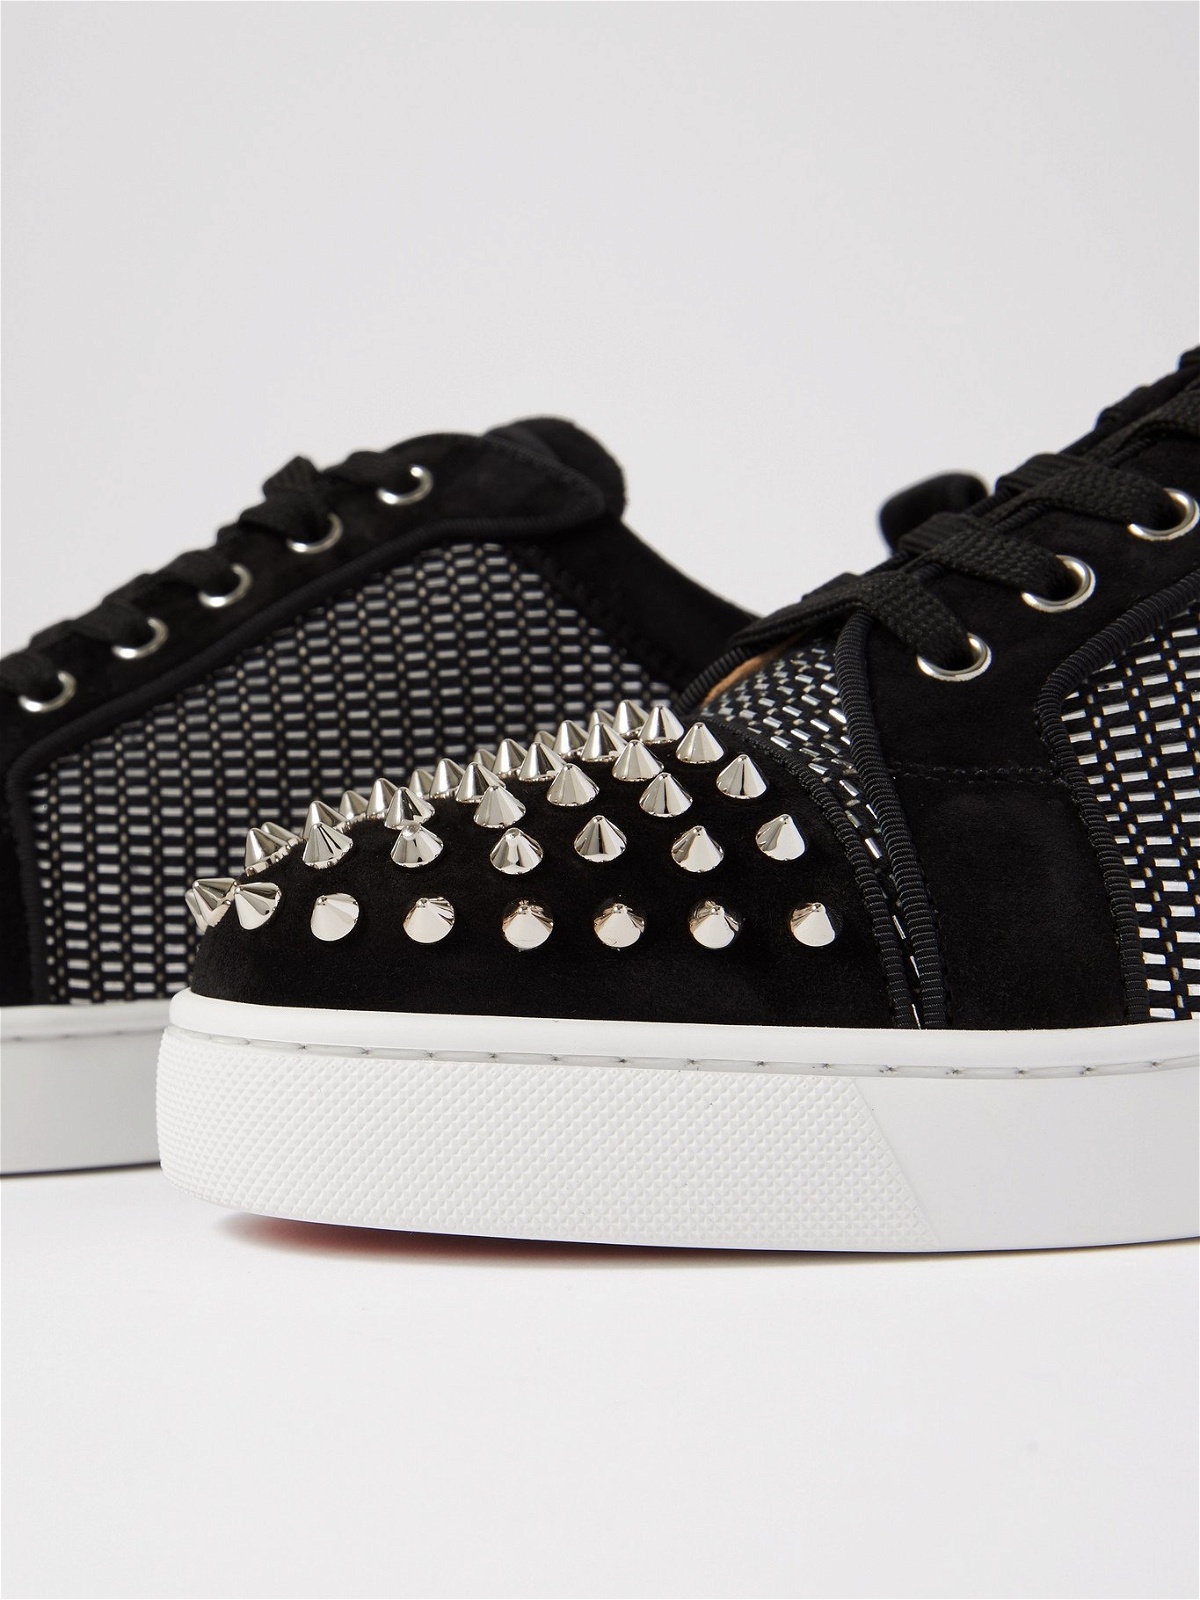 CHRISTIAN LOUBOUTIN - Louis Junior Spikes Orlato Suede and Canvas Sneakers  - Black - 40 Christian Louboutin